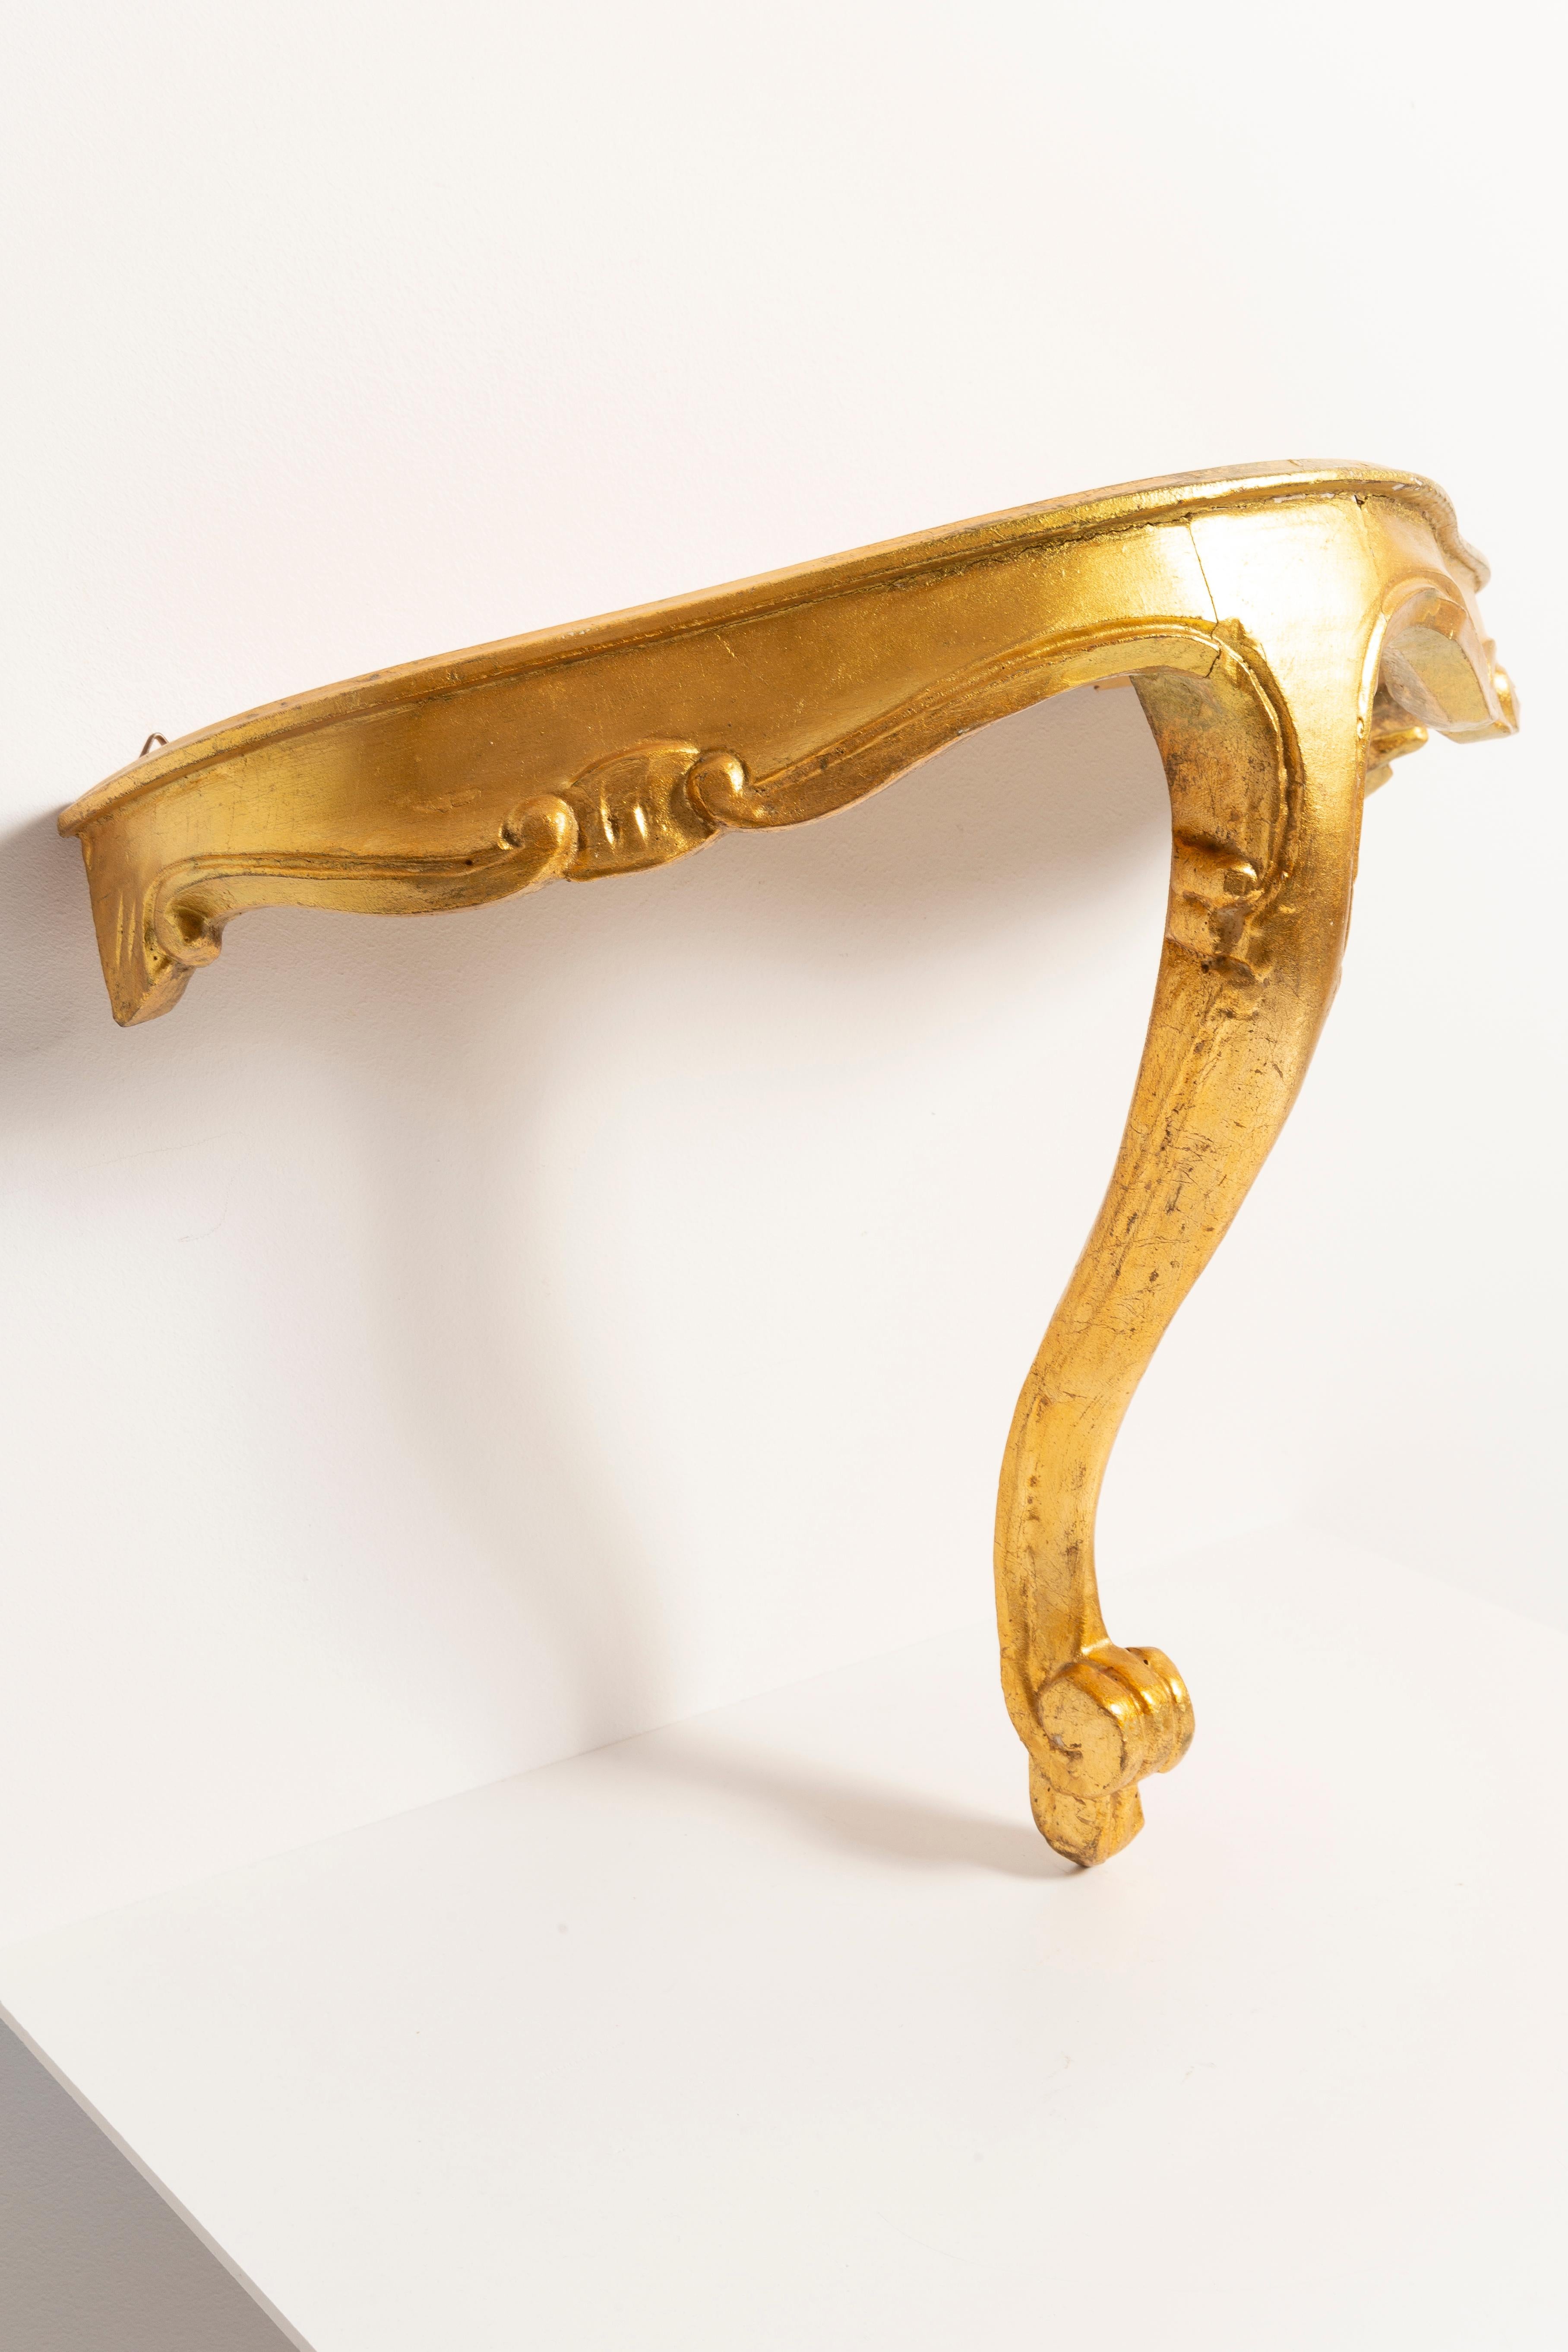 Hand-Painted 20th Century Wall Console Table Shelf Gold Curvy Decorative Leg, Europe, 1960s For Sale